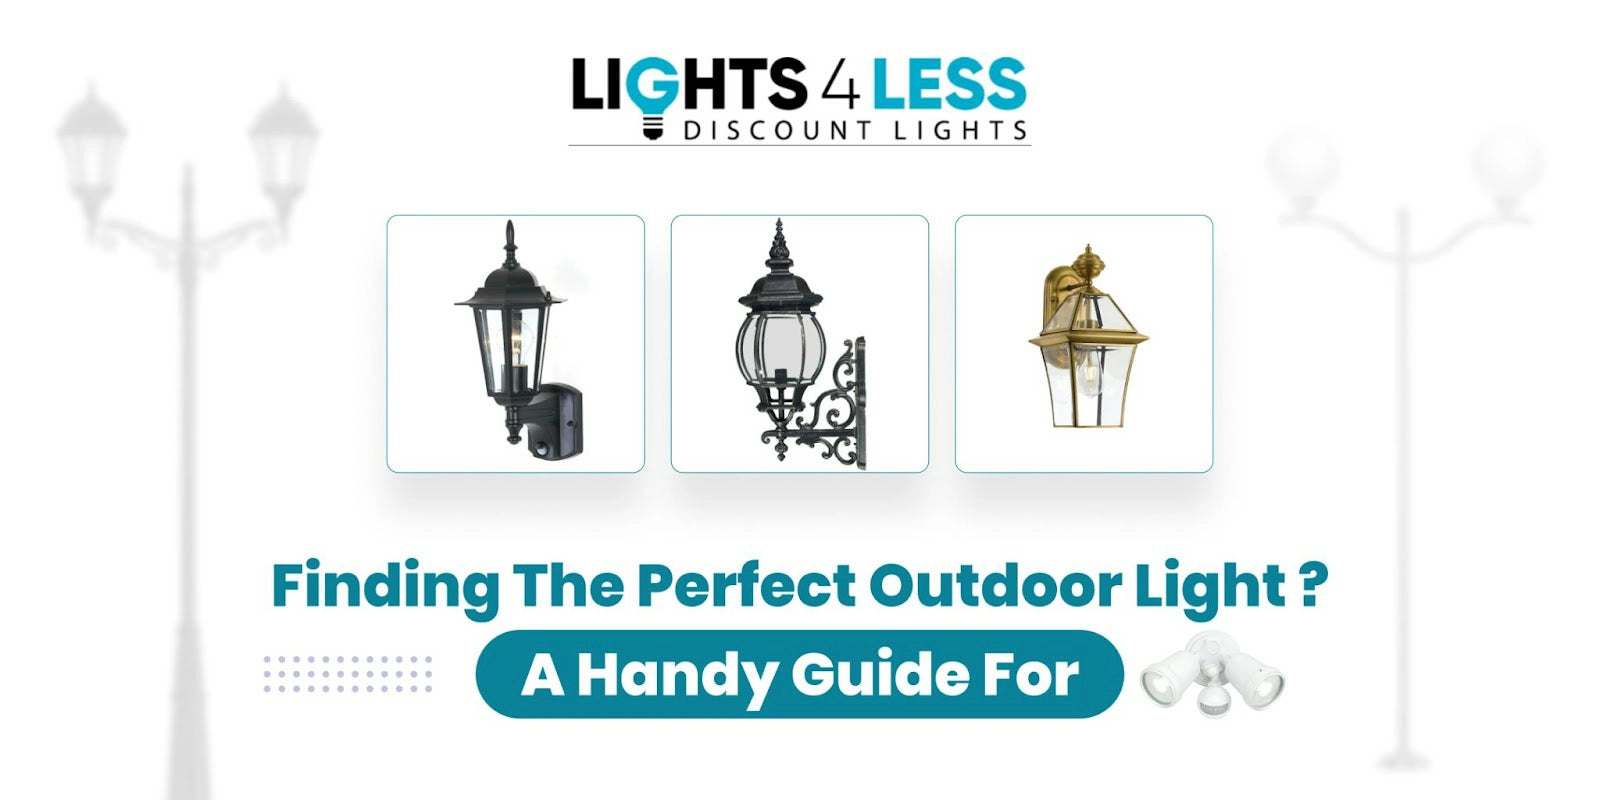 What Should I Look for in an Outdoor Light